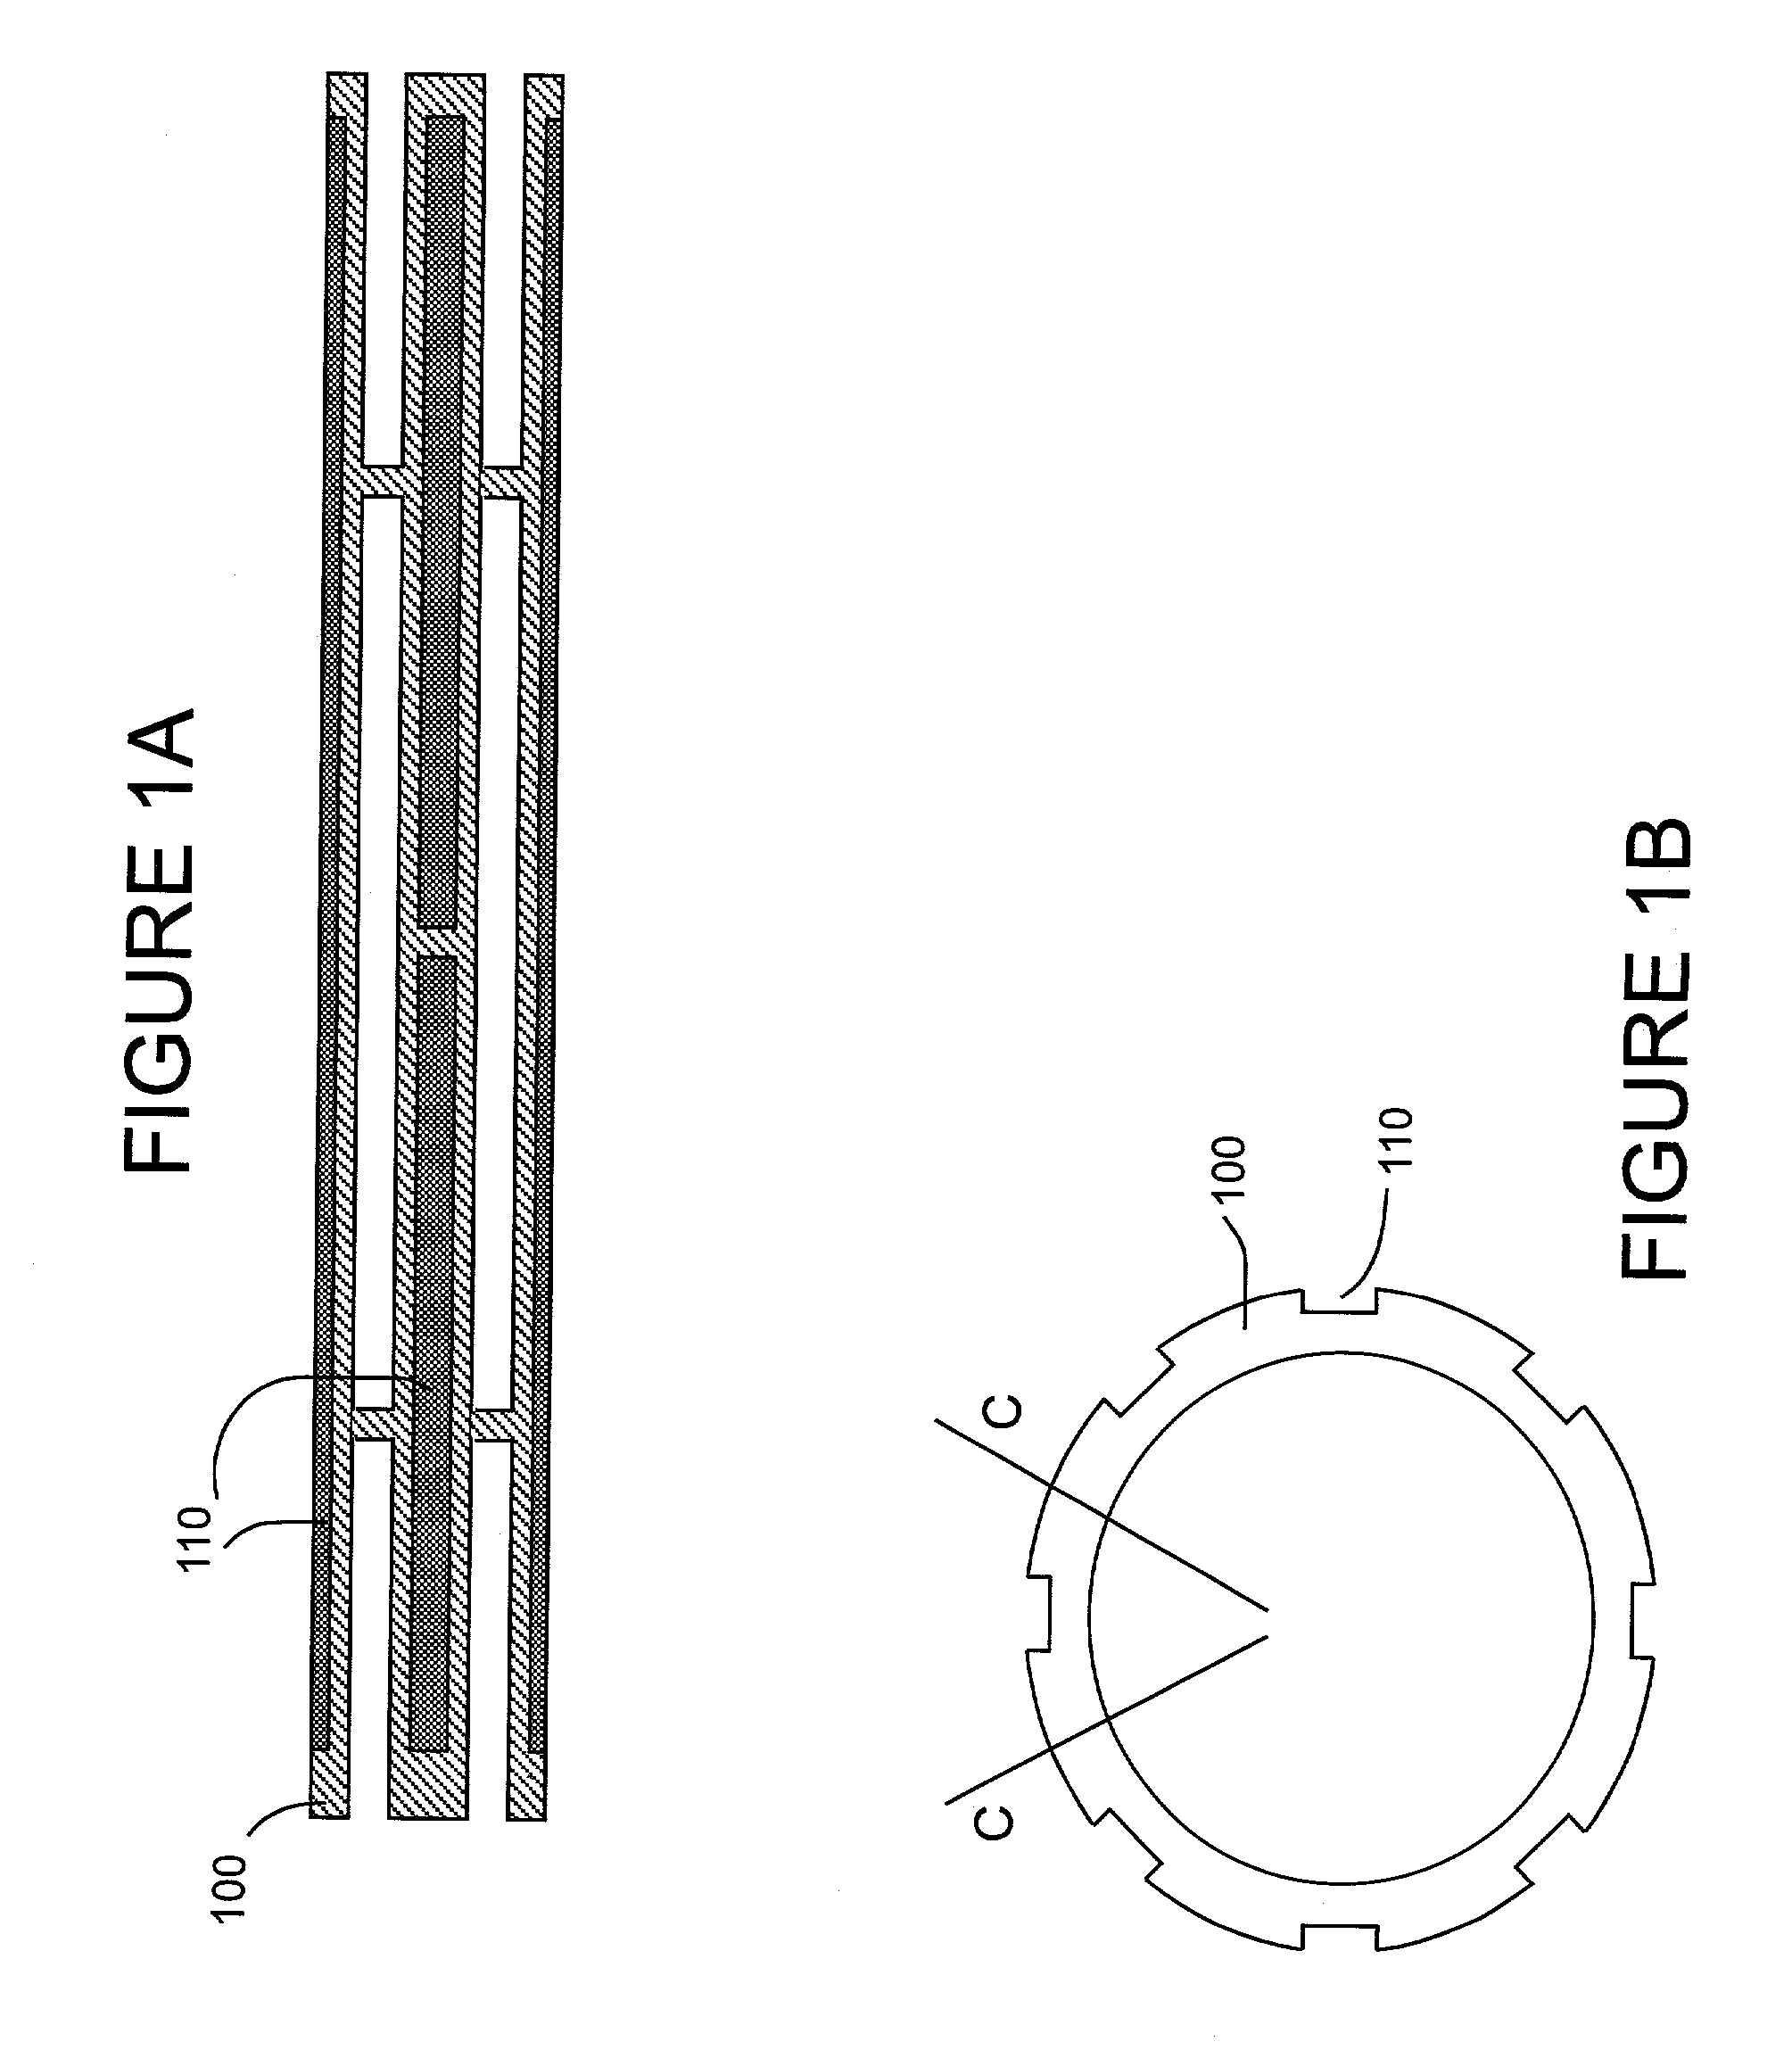 Methods for the inhibition of neointima formation